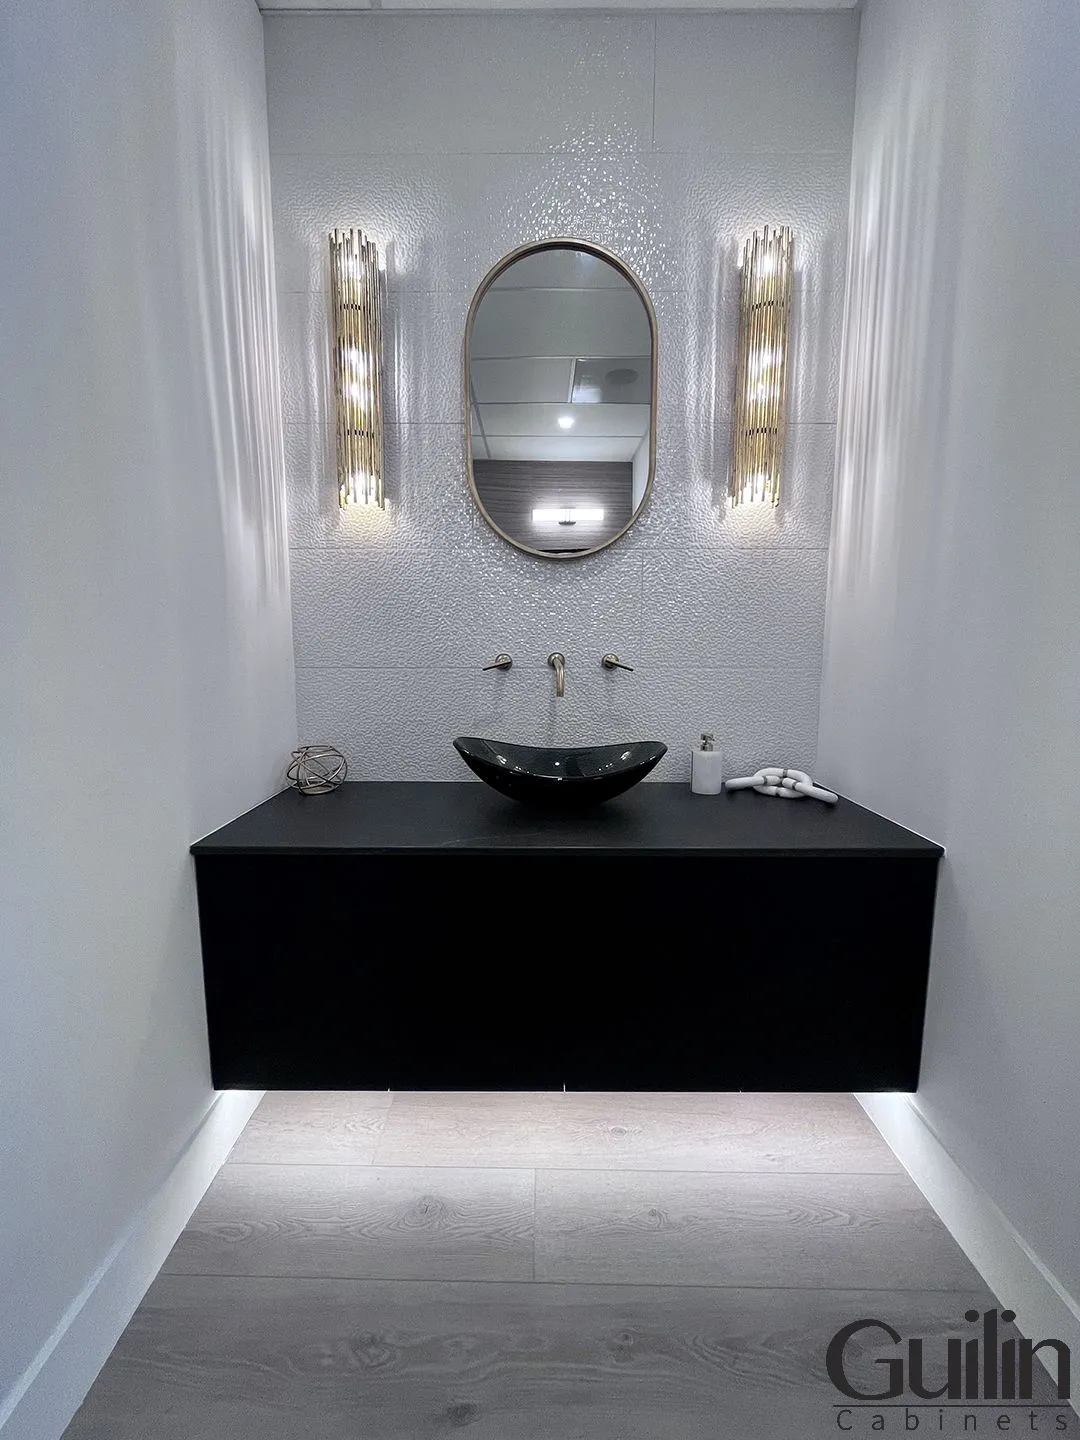 When choose place for powder room you need consider size and aviable space of your home